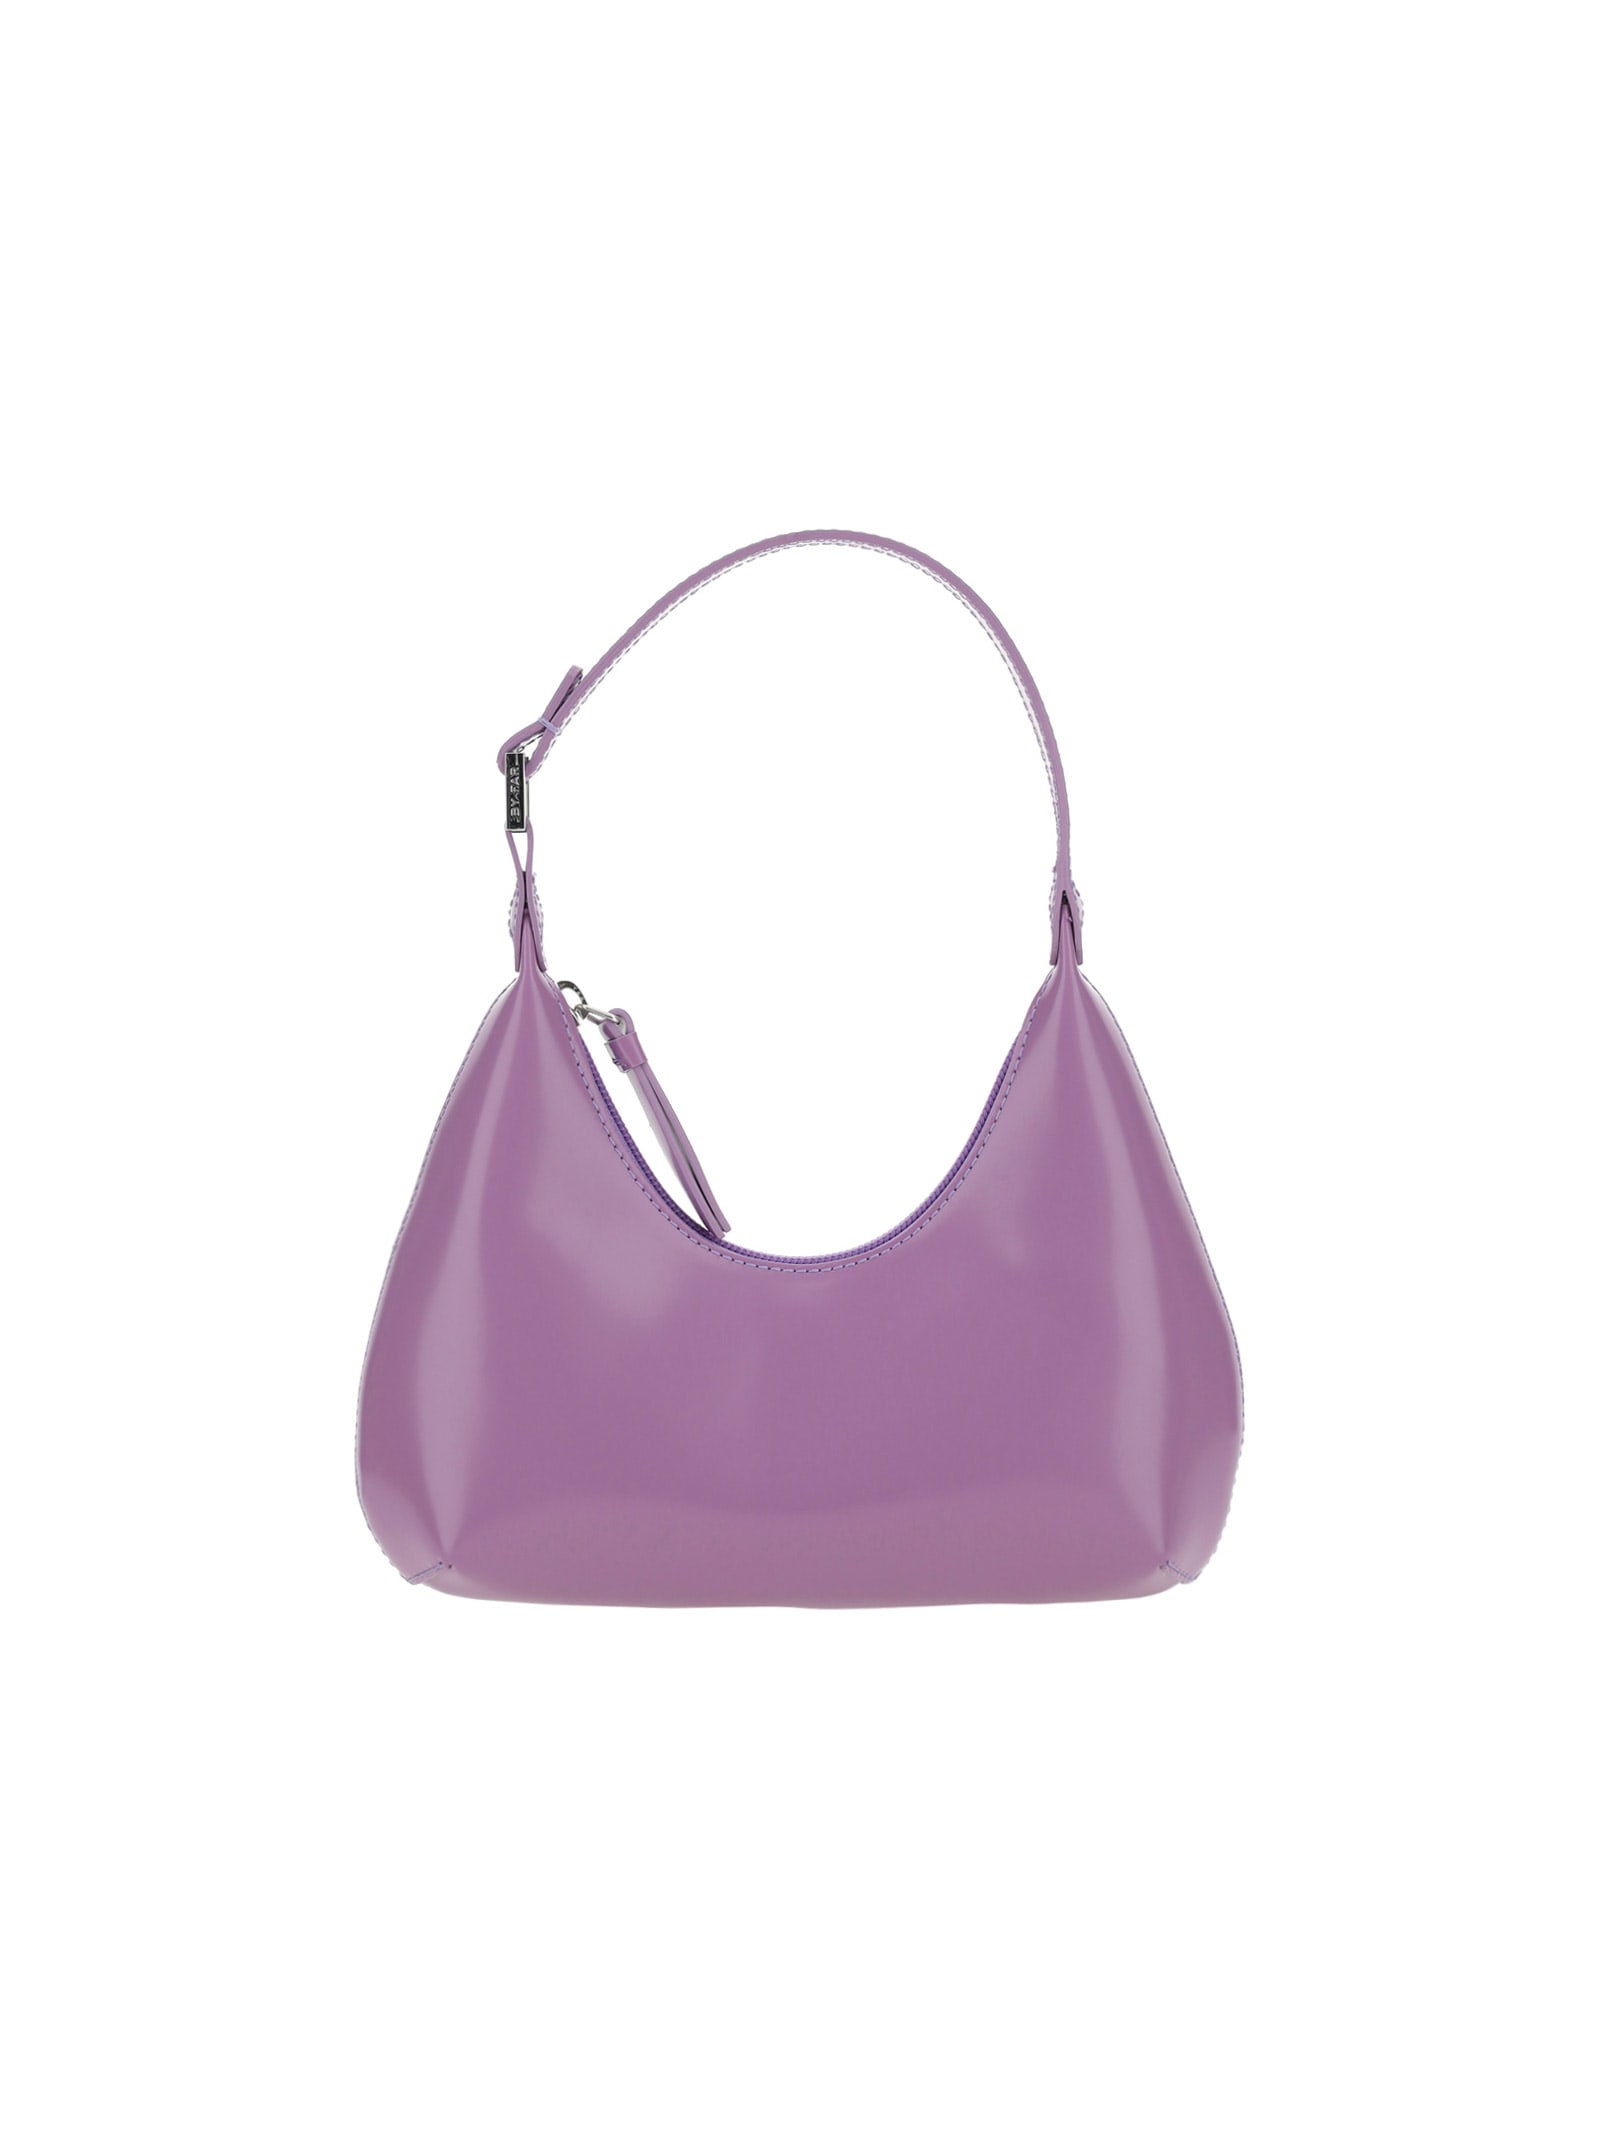 by Far Baby Amber Patent Leather Shoulder Bag - Pink